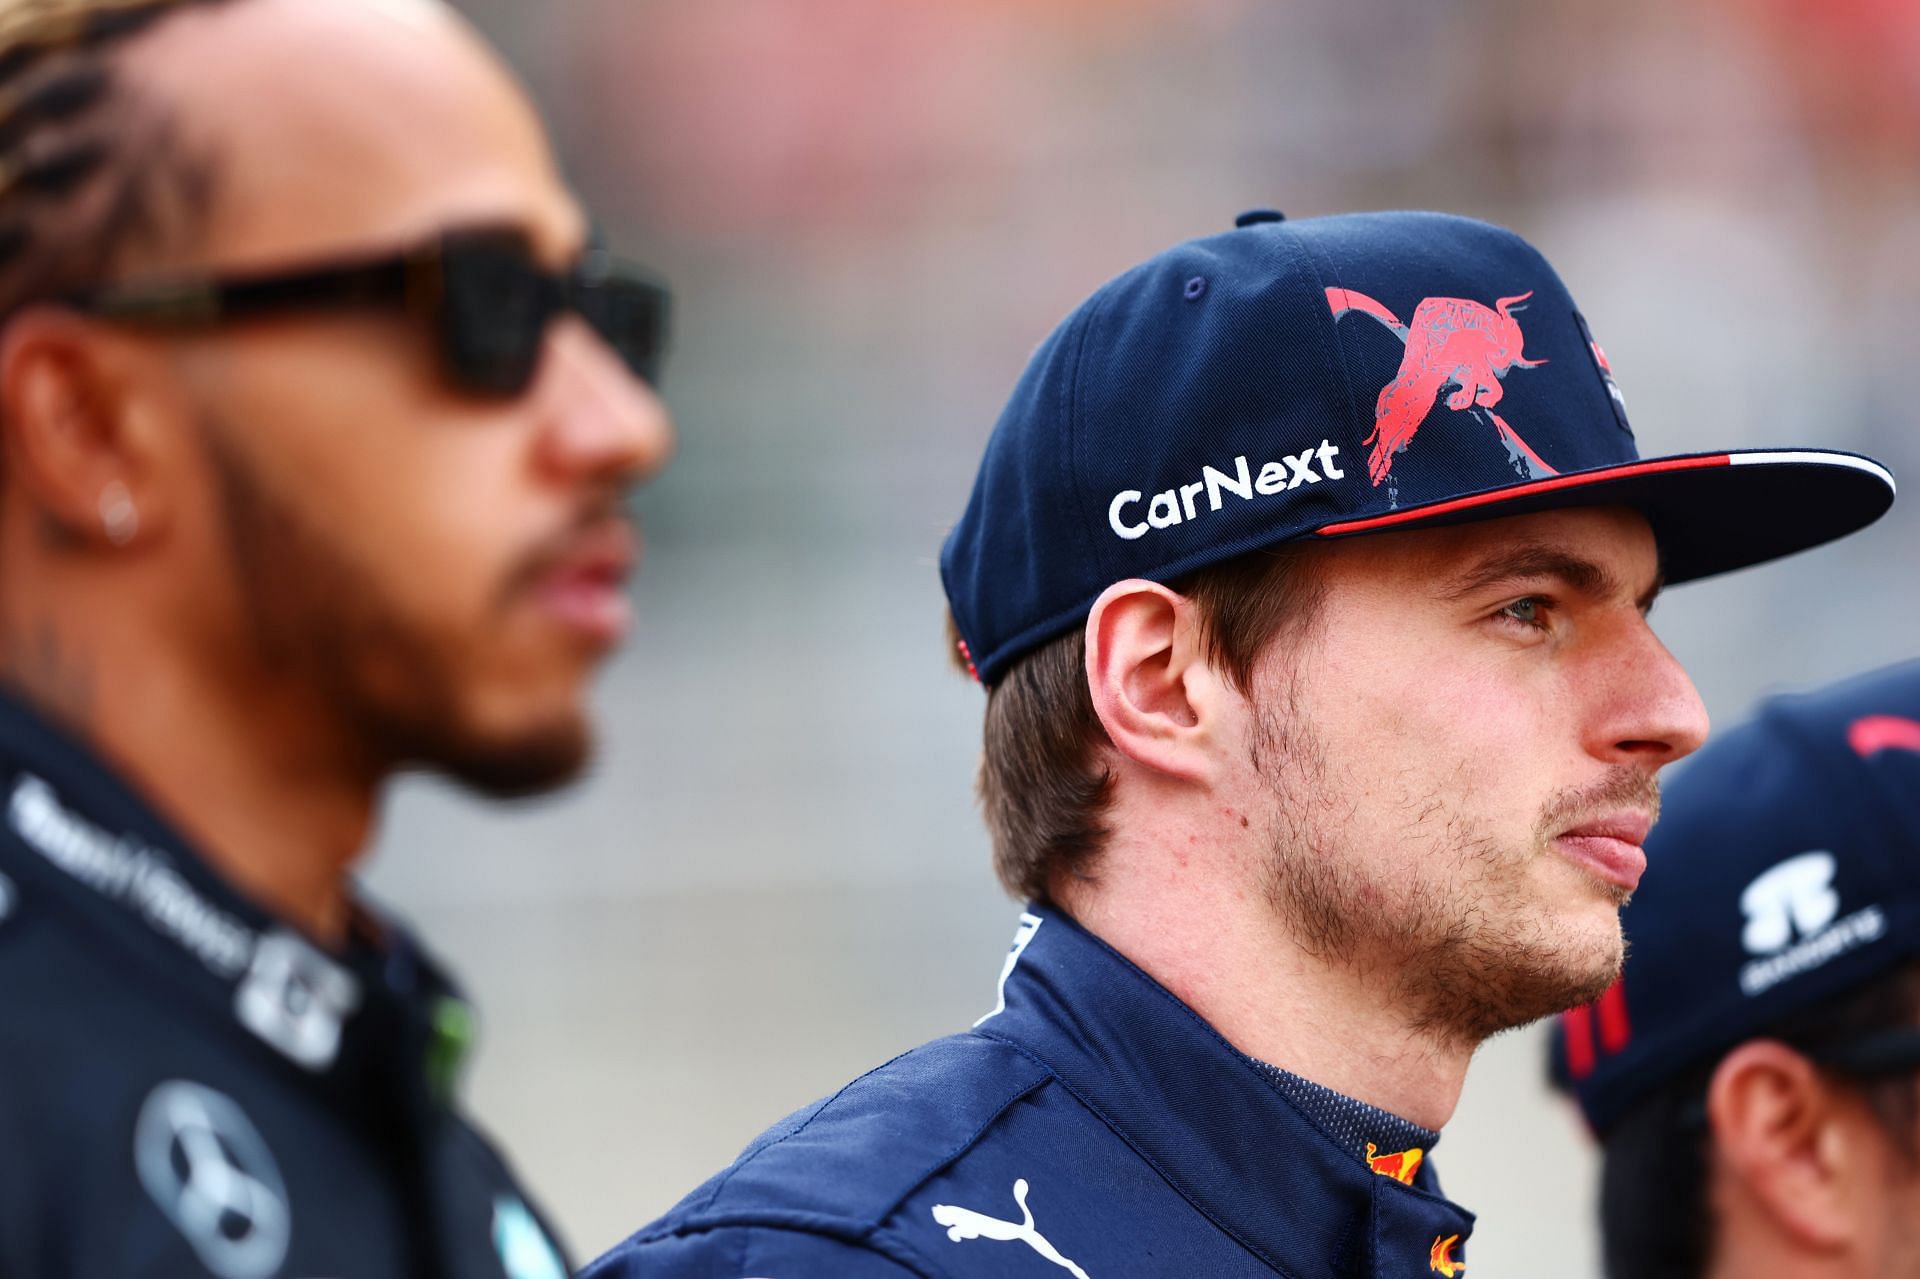 Lewis Hamilton (left) and Max Verstappen (right) at the 2022 F1 Grand Prix of Bahrain